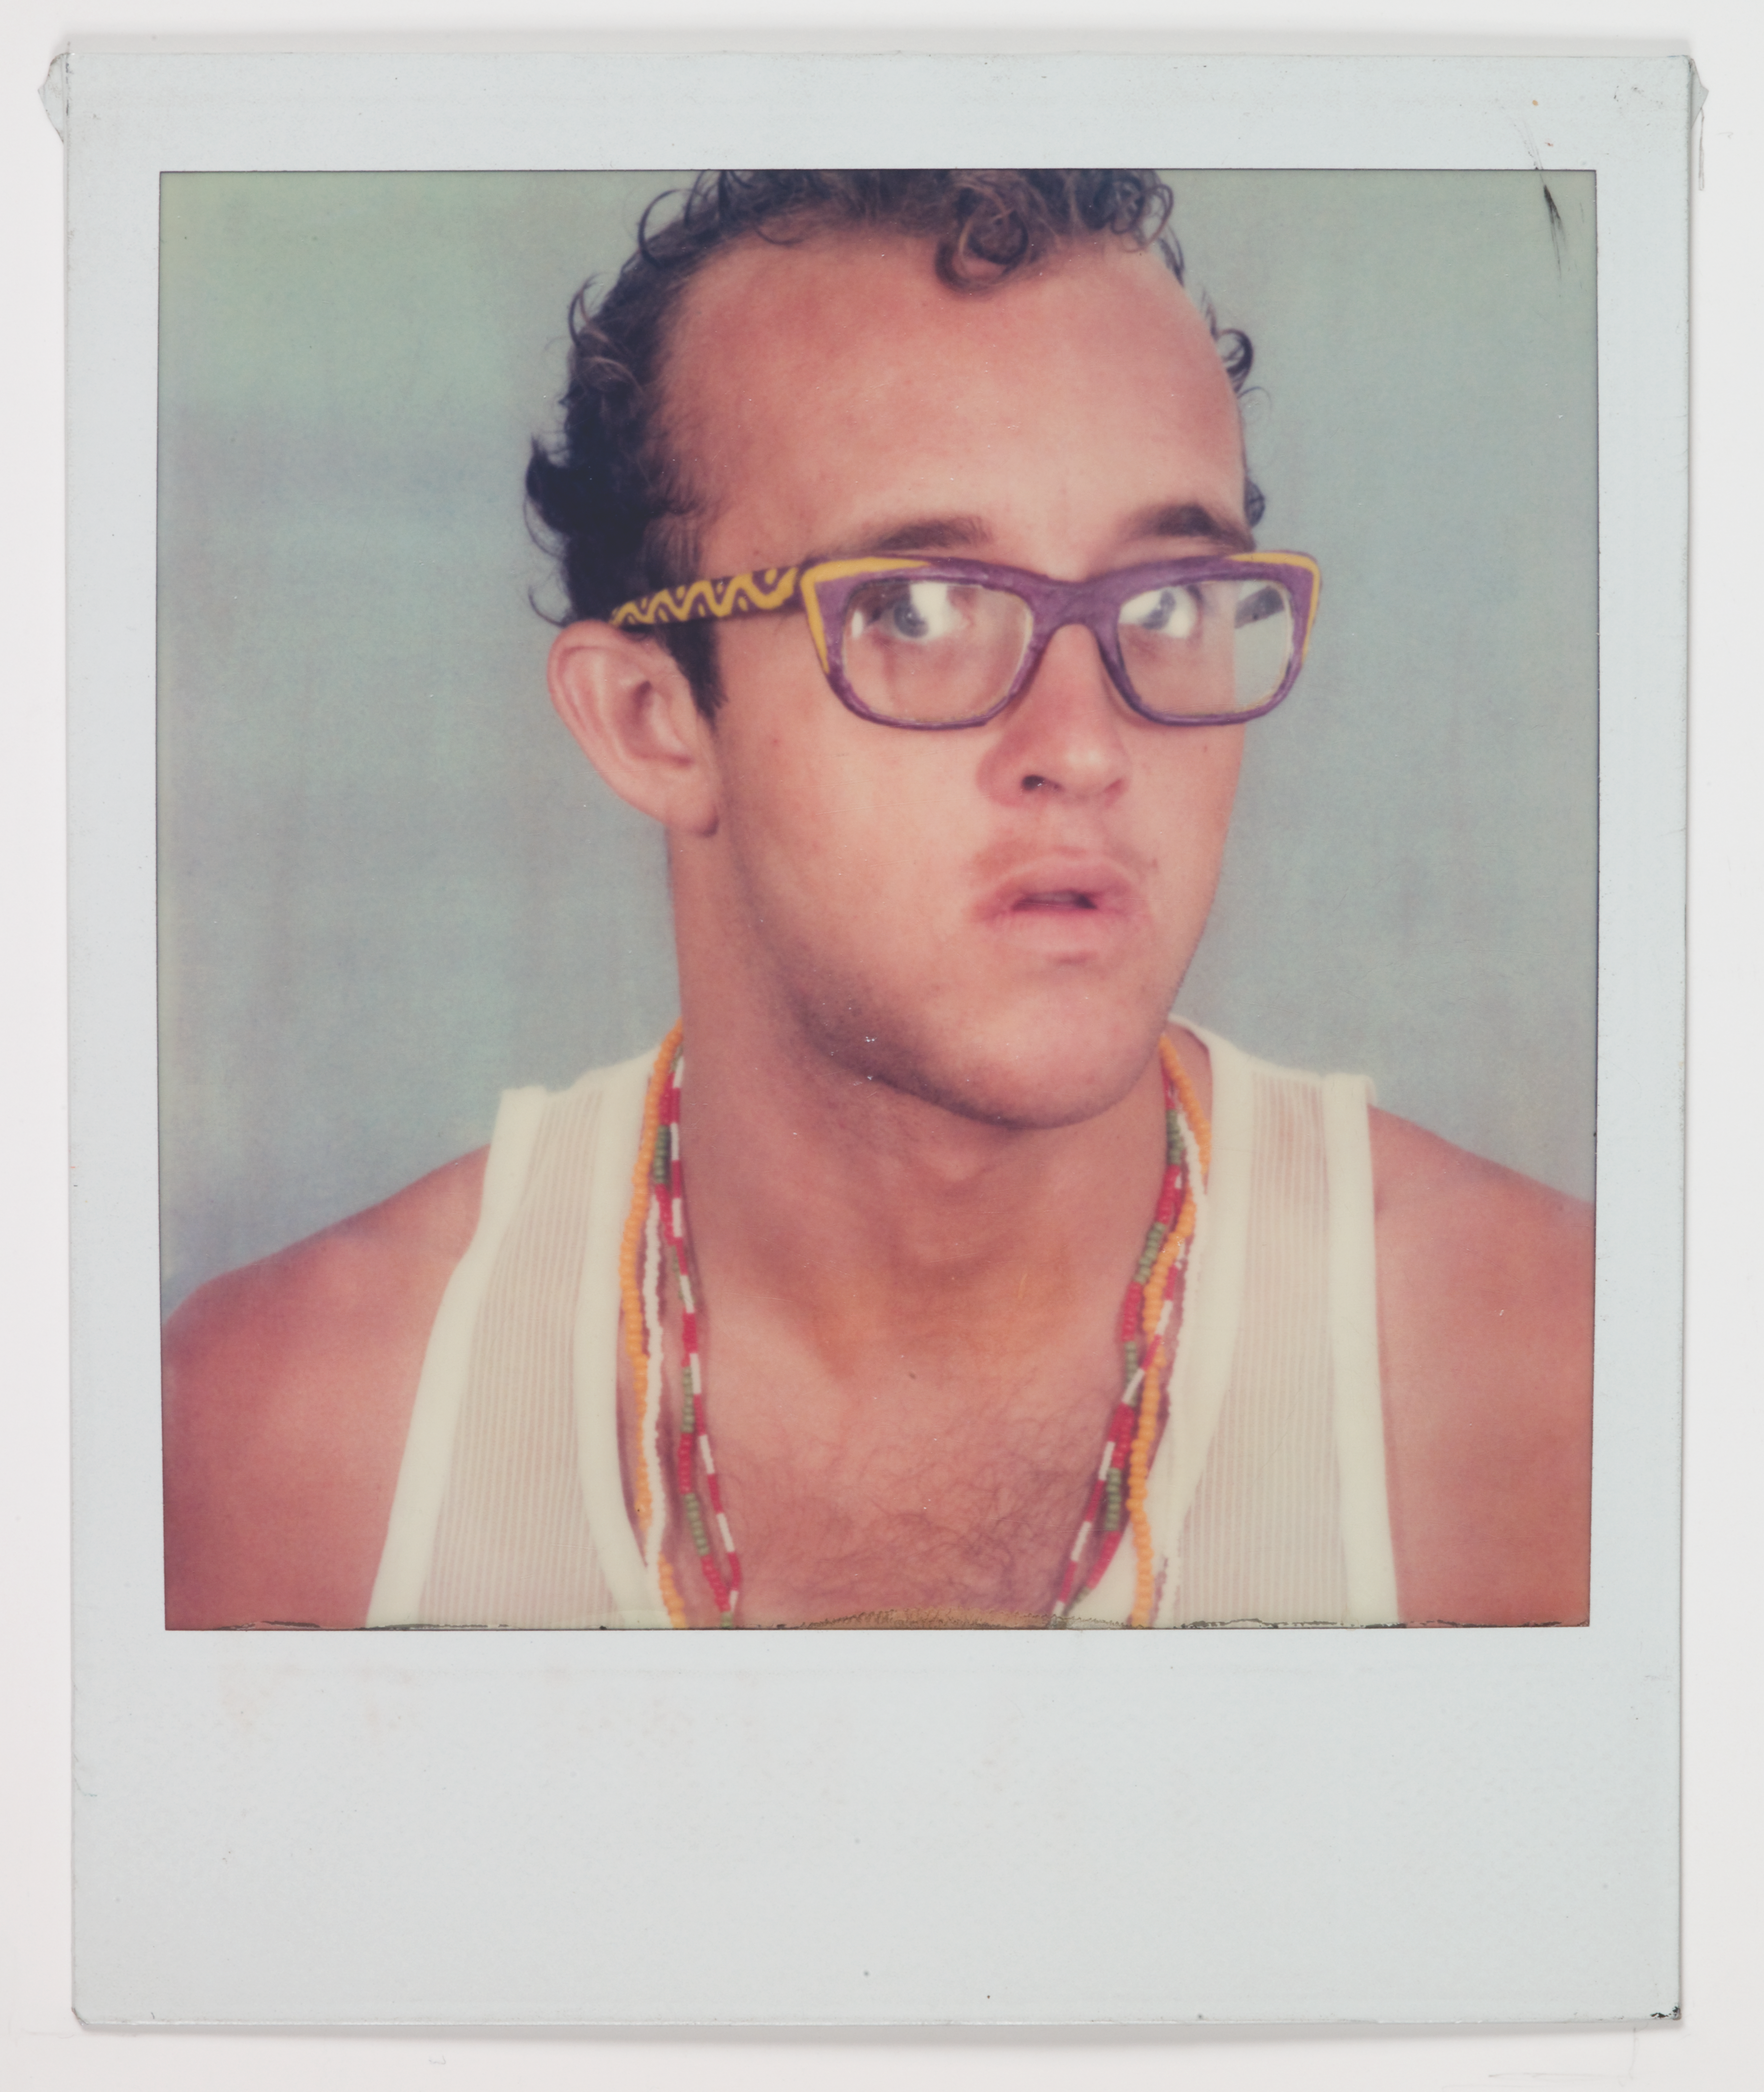 Image of artist Keith Haring. He wears purple glasses with yellow designs on the sides, a white tank top, colorful necklaces, and has short curly hair.